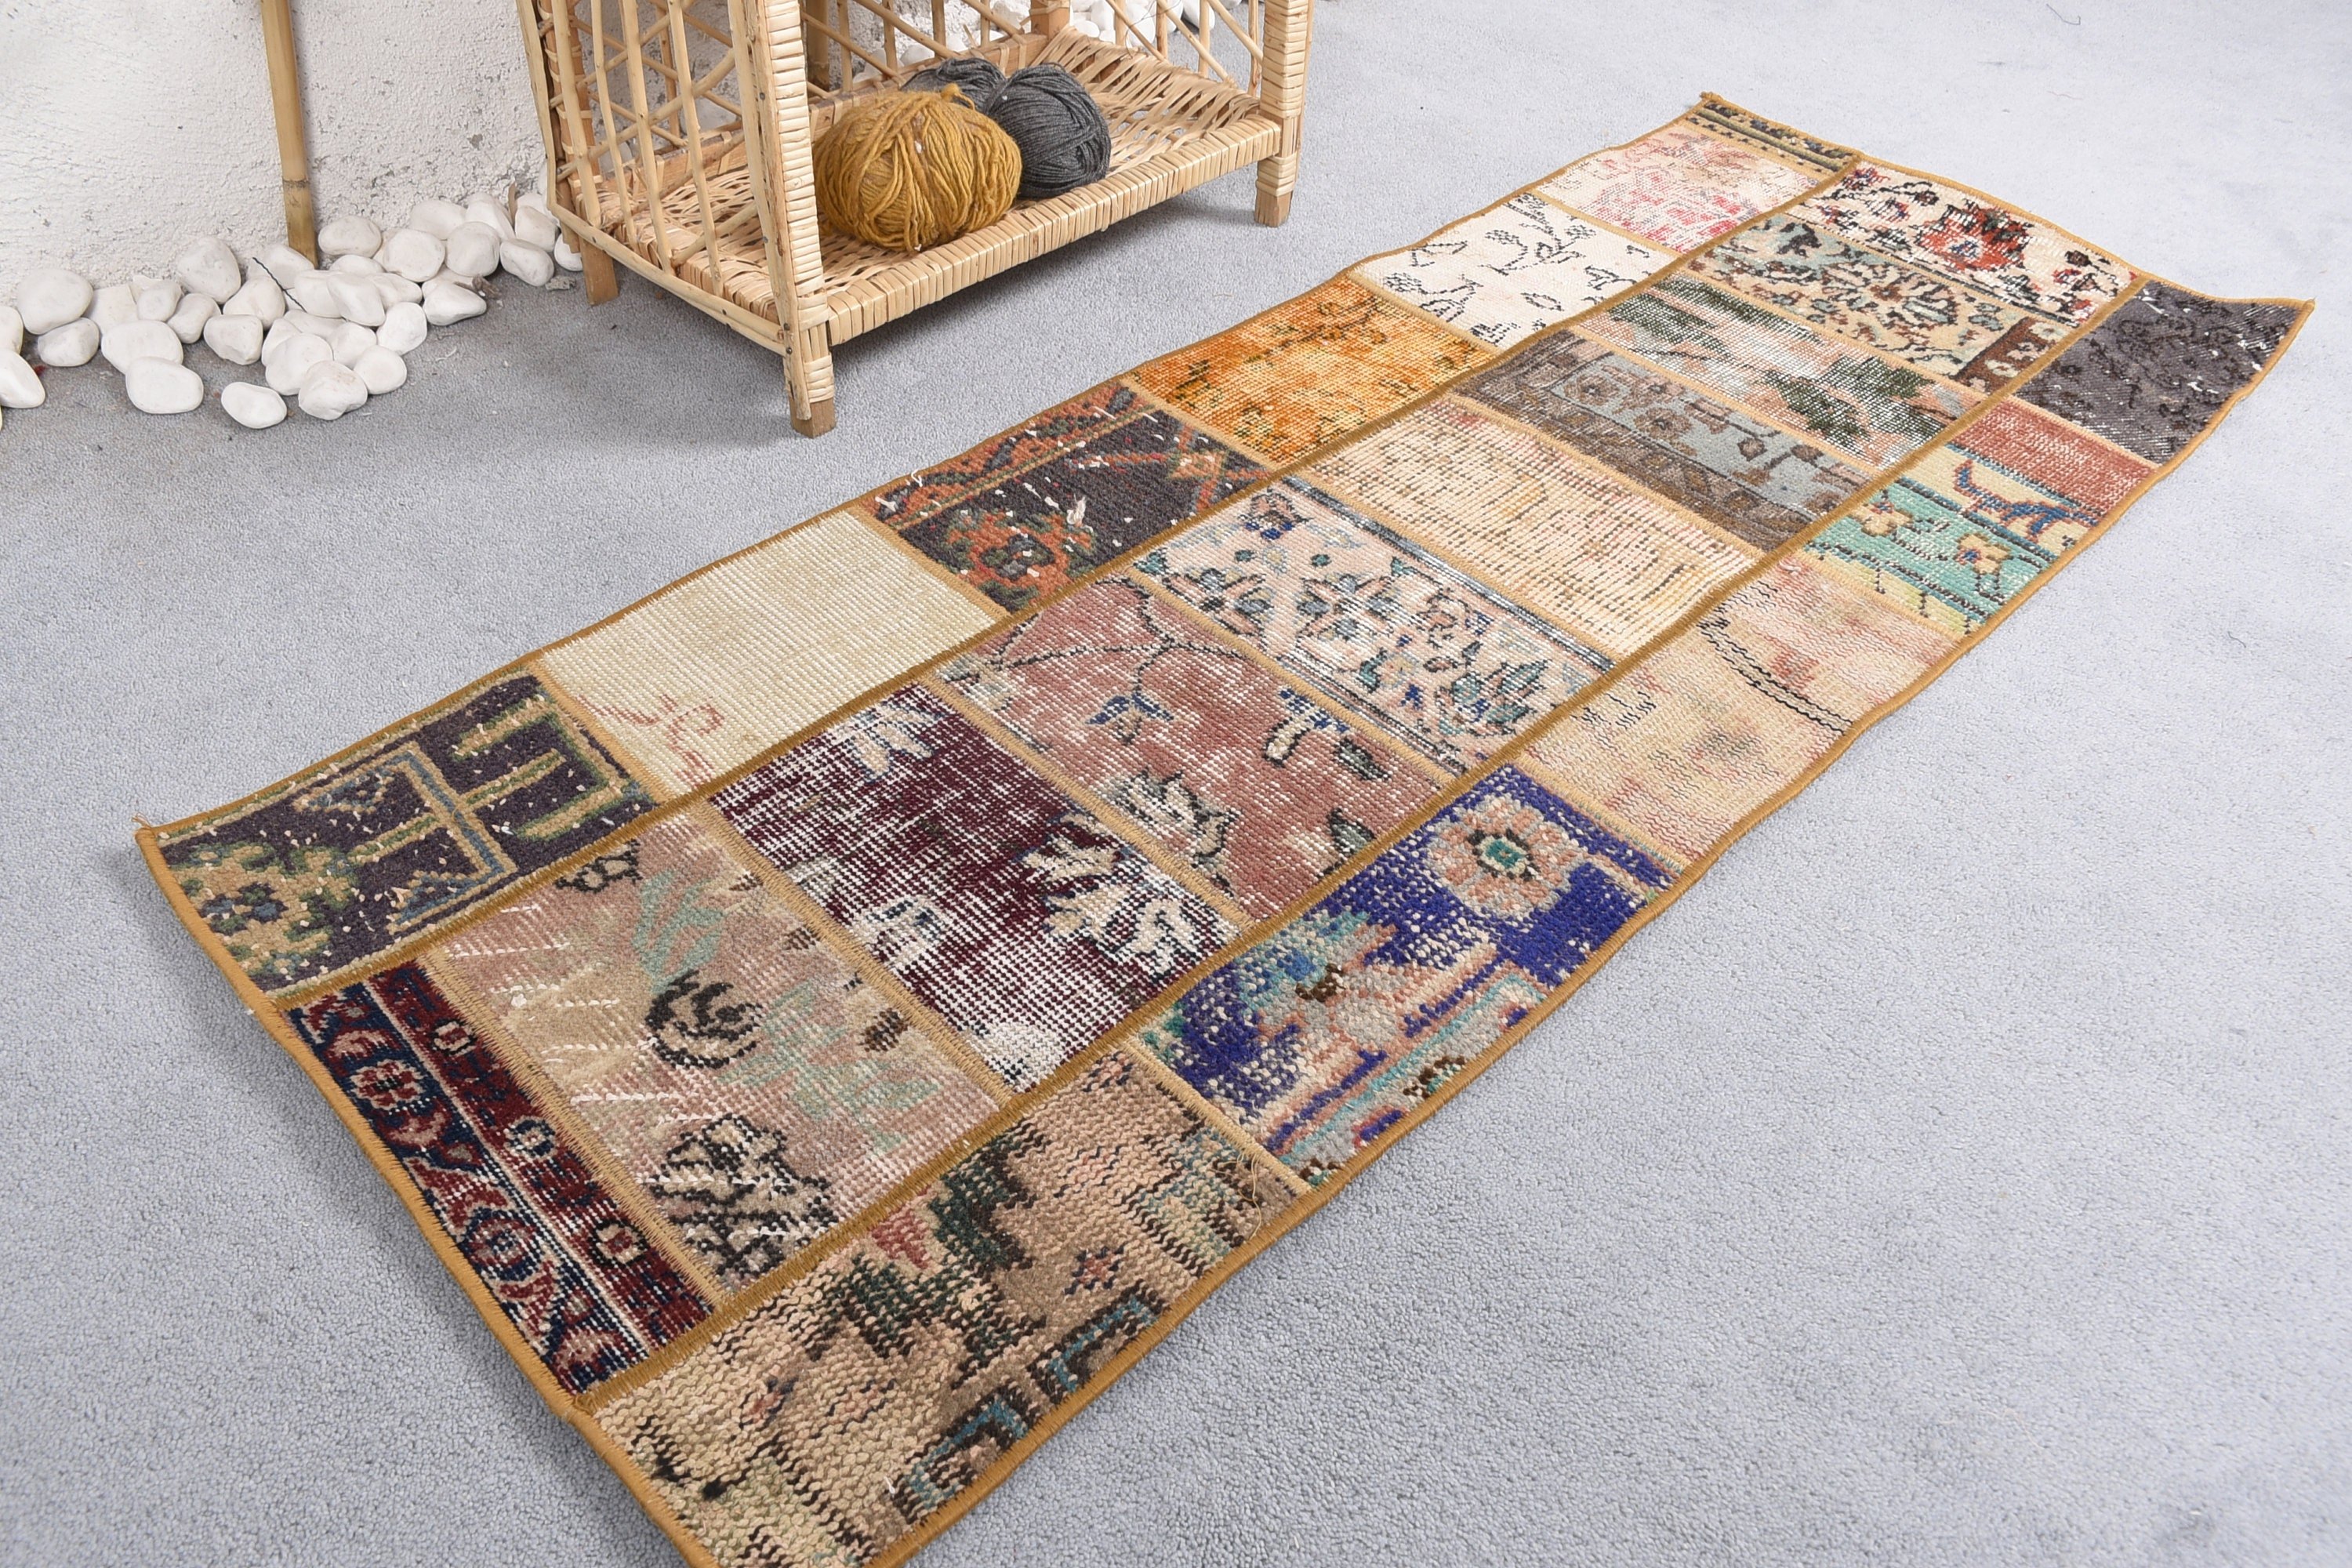 1.9x4.9 ft Small Rug, Bedroom Rug, Rugs for Kitchen, Antique Rug, Vintage Rug, Turkish Rugs, Entry Rug, Rainbow Moroccan Rug, Bright Rugs